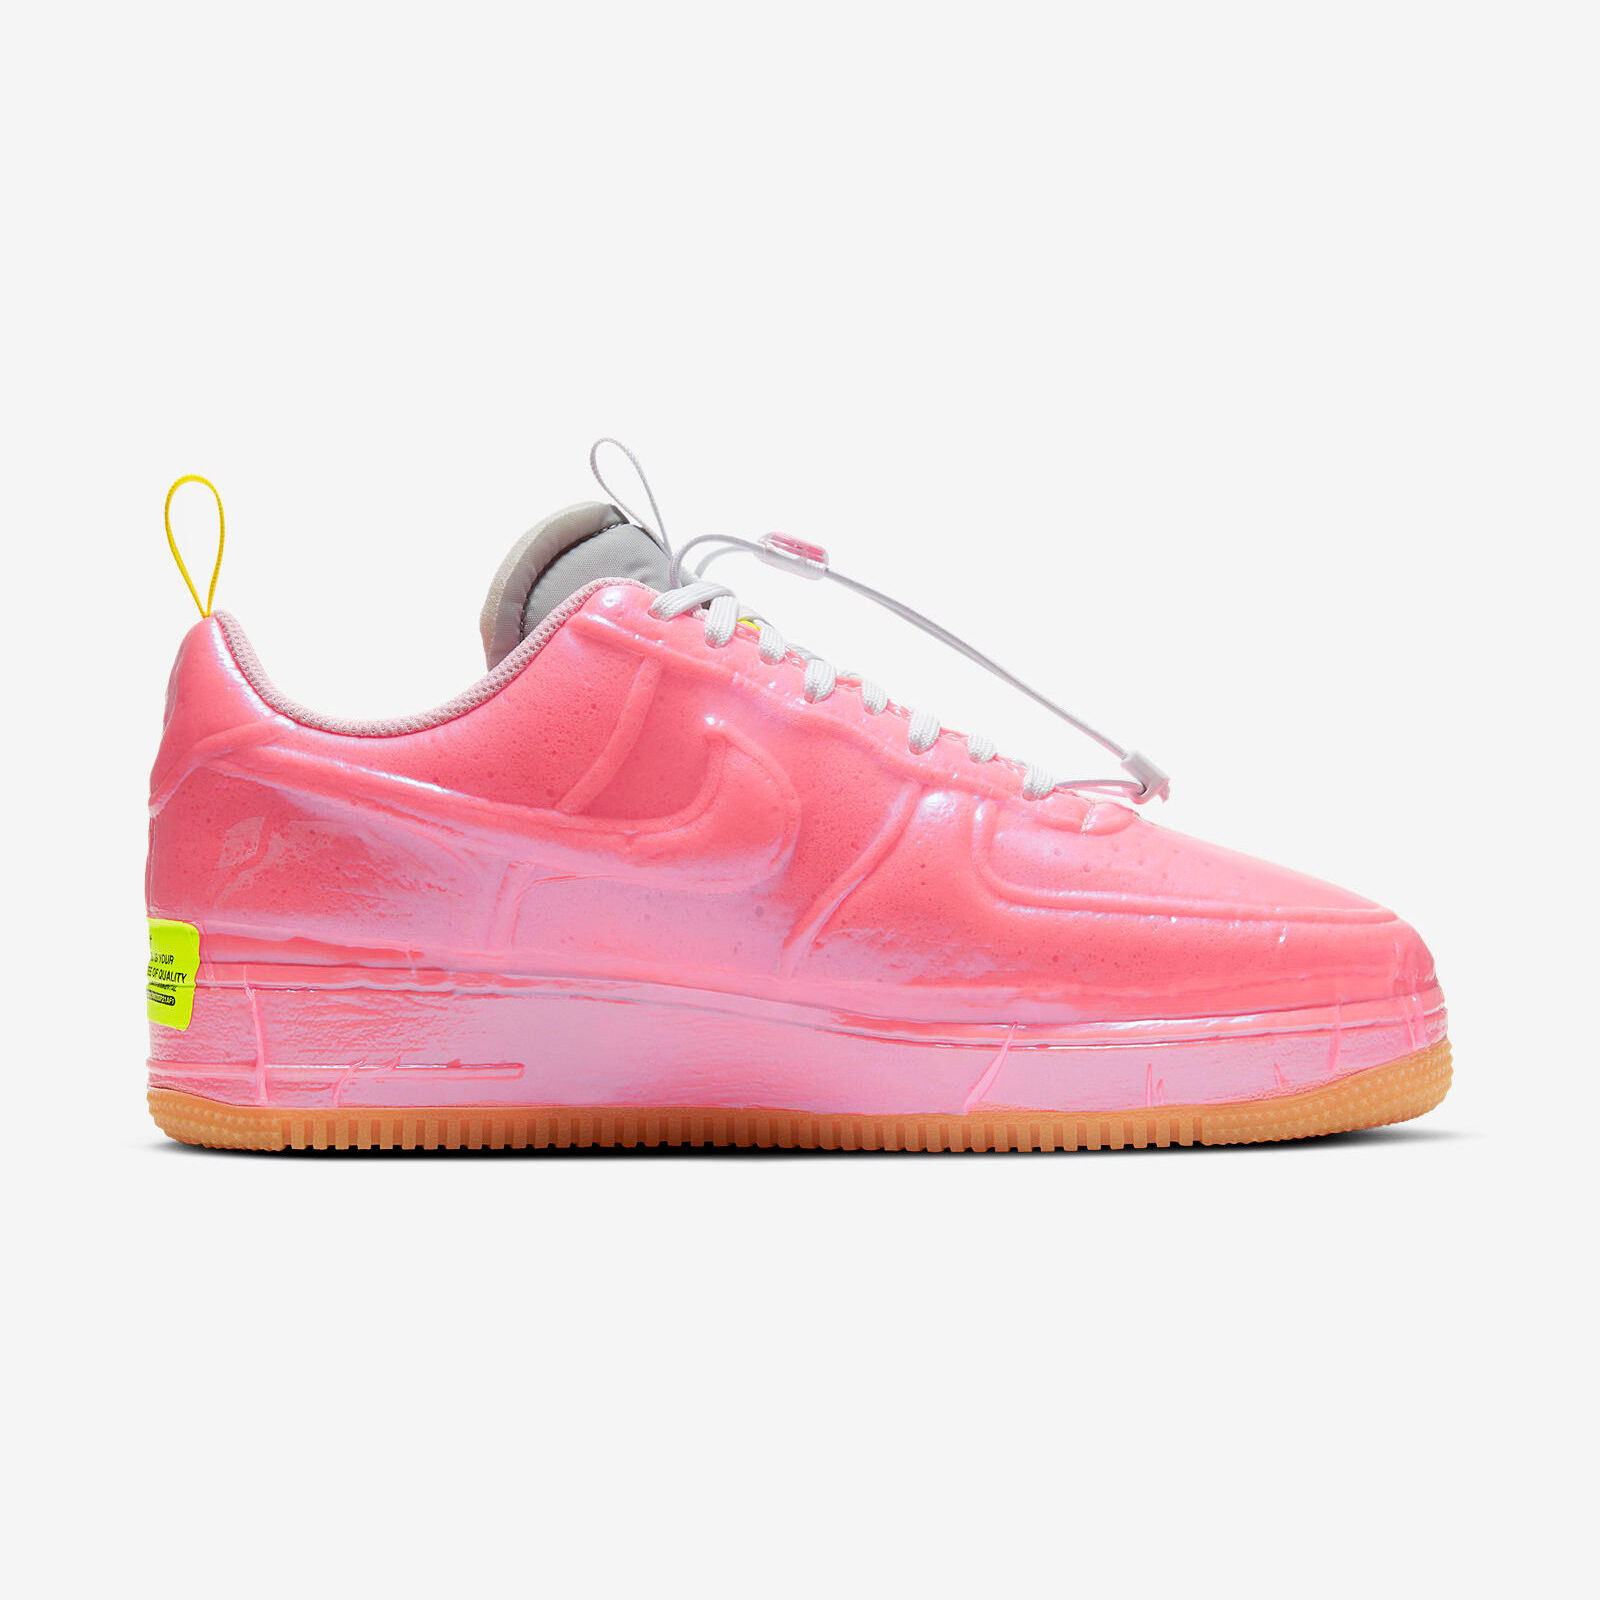 Nike Air Force 1 Low
Experimental
« Racer Pink »